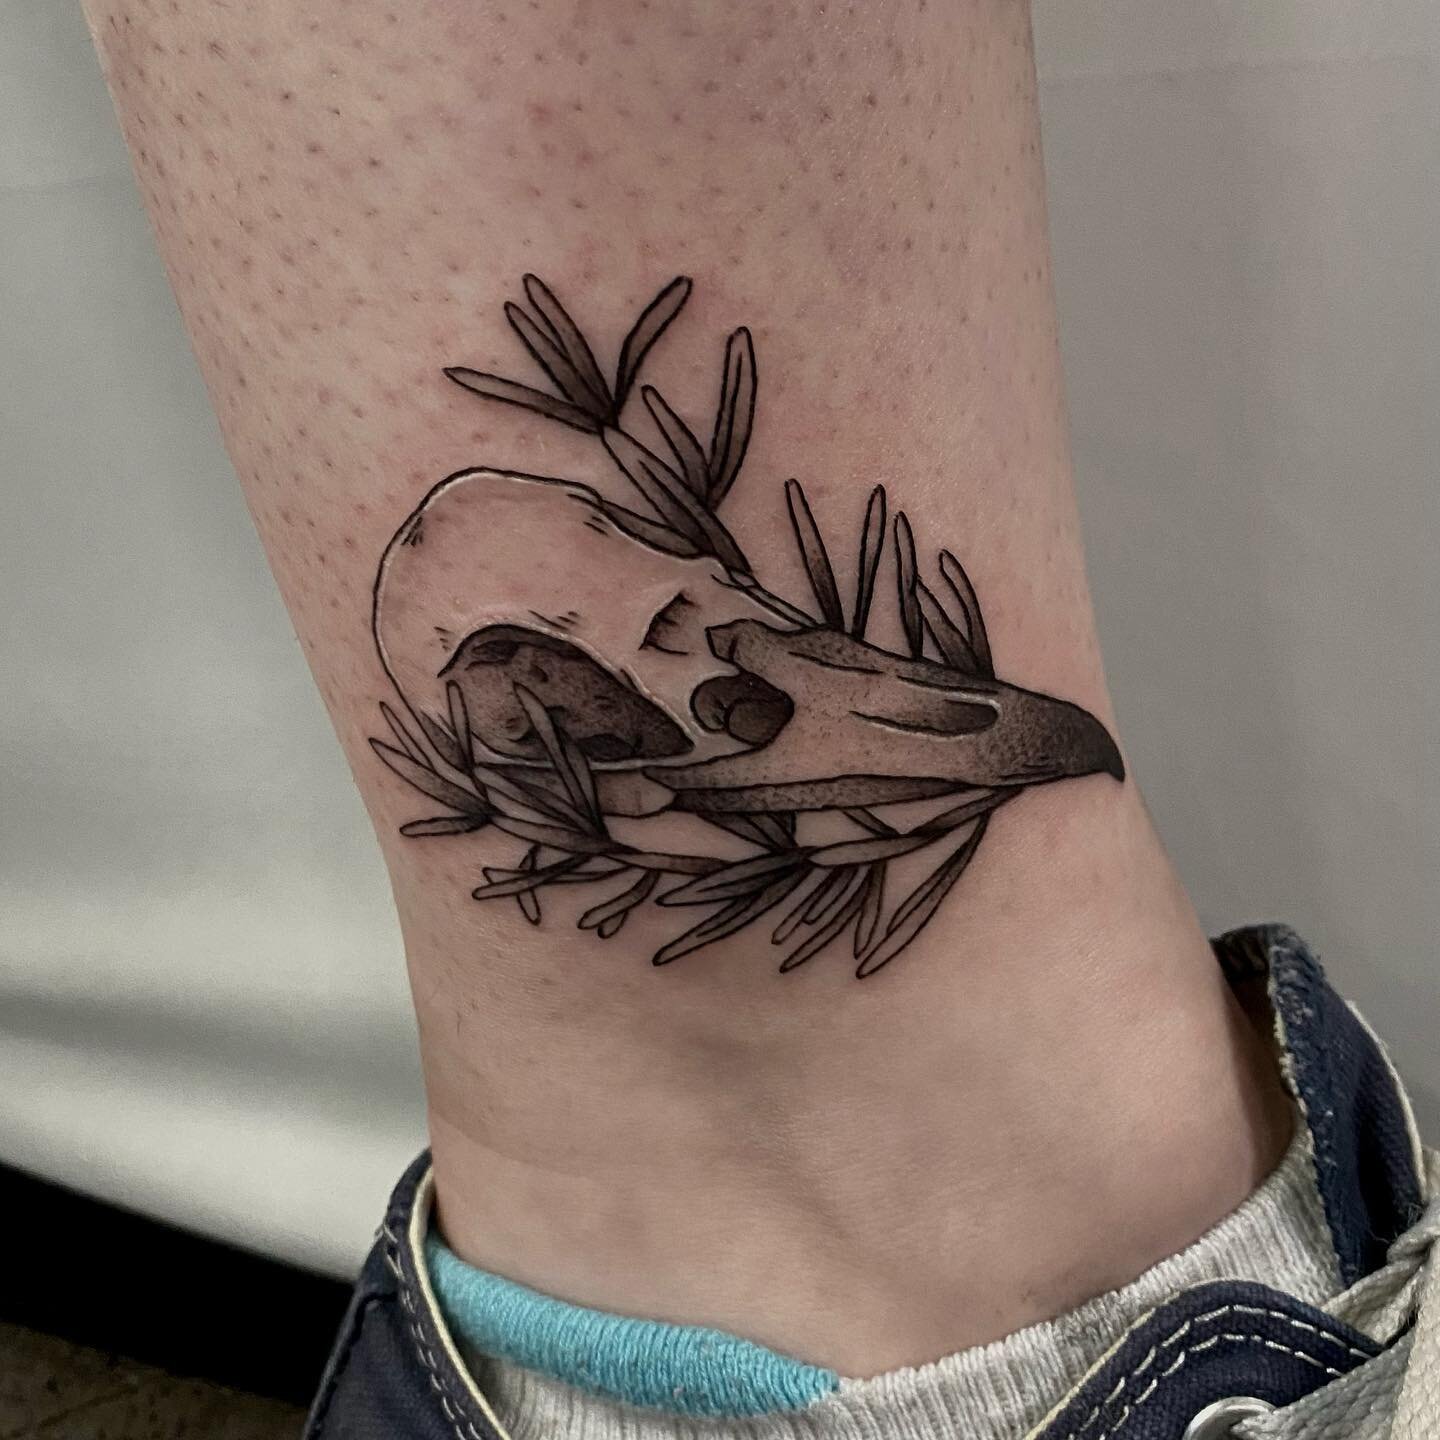 Got to do the crow skull from my flash yesterday, super proud of this one 💀